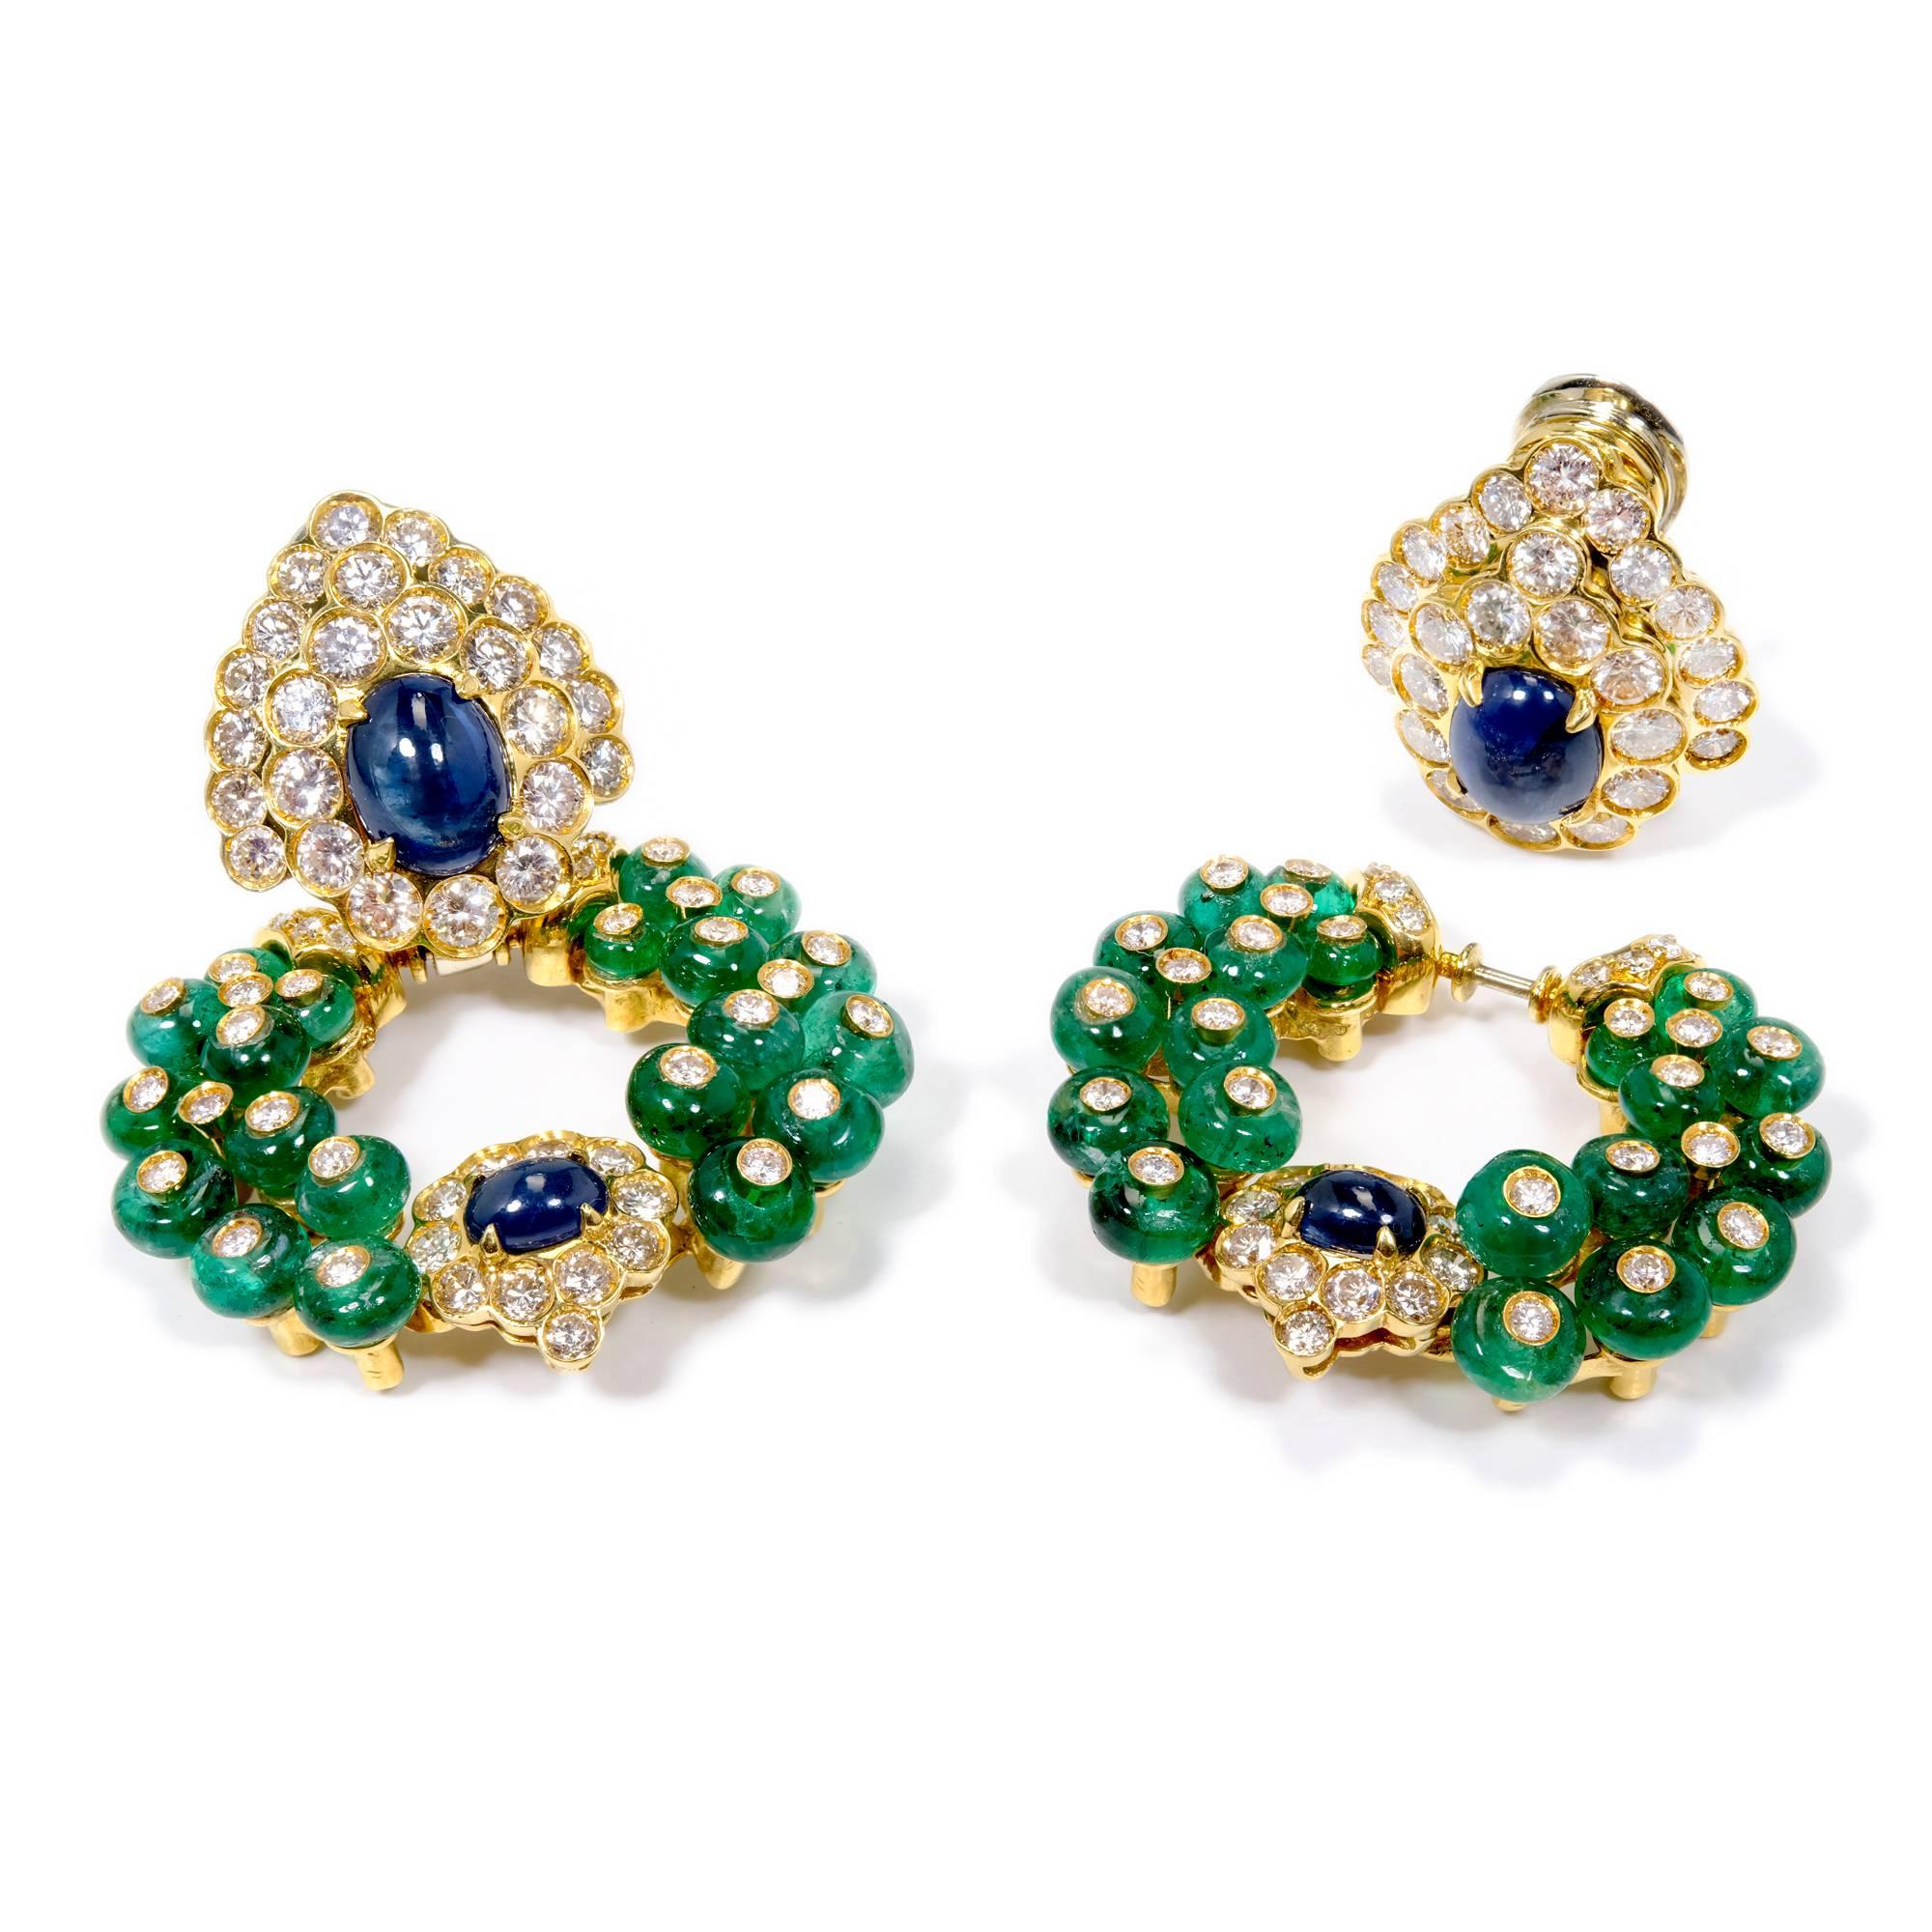 Emerald sapphire diamond dangle day and night earrings by Italian designer Giovane. The sapphire and diamond tops can be worn by themselves or with the emerald sapphire diamond bottoms. The post folds away for non pierced ears and up for pierced.